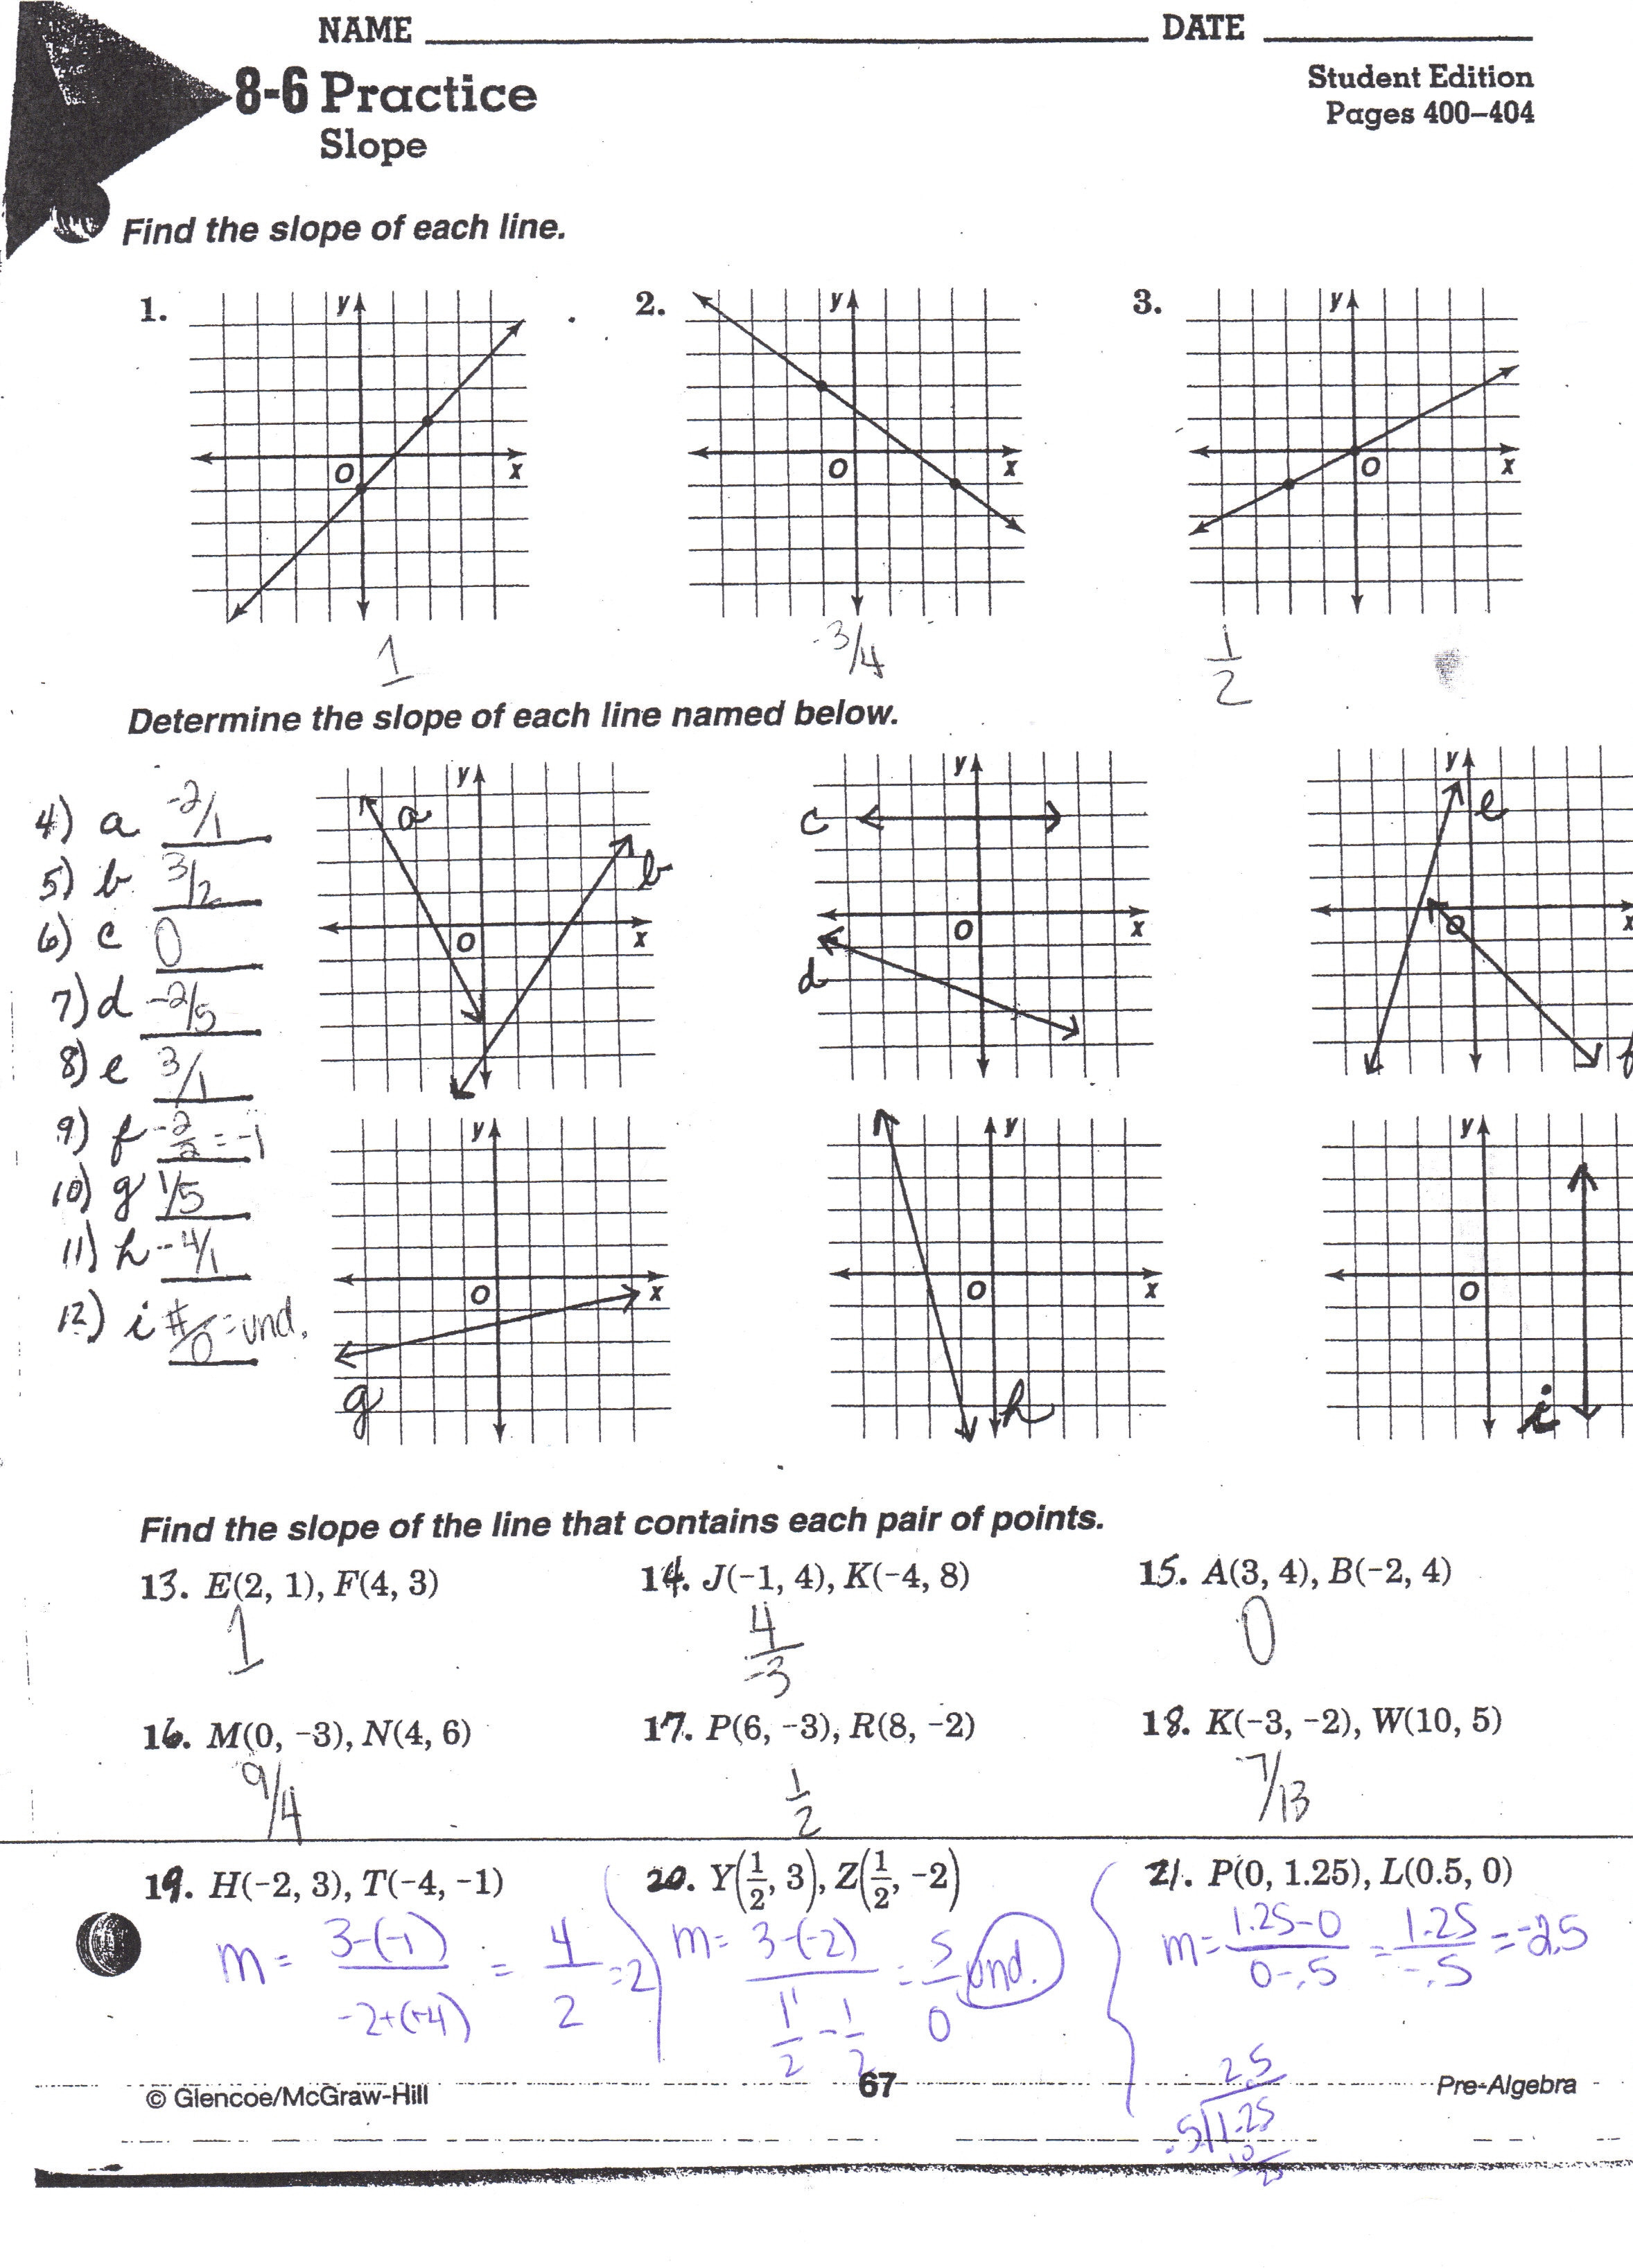 writing-linear-equations-in-slope-intercept-form-worksheet-db-excel